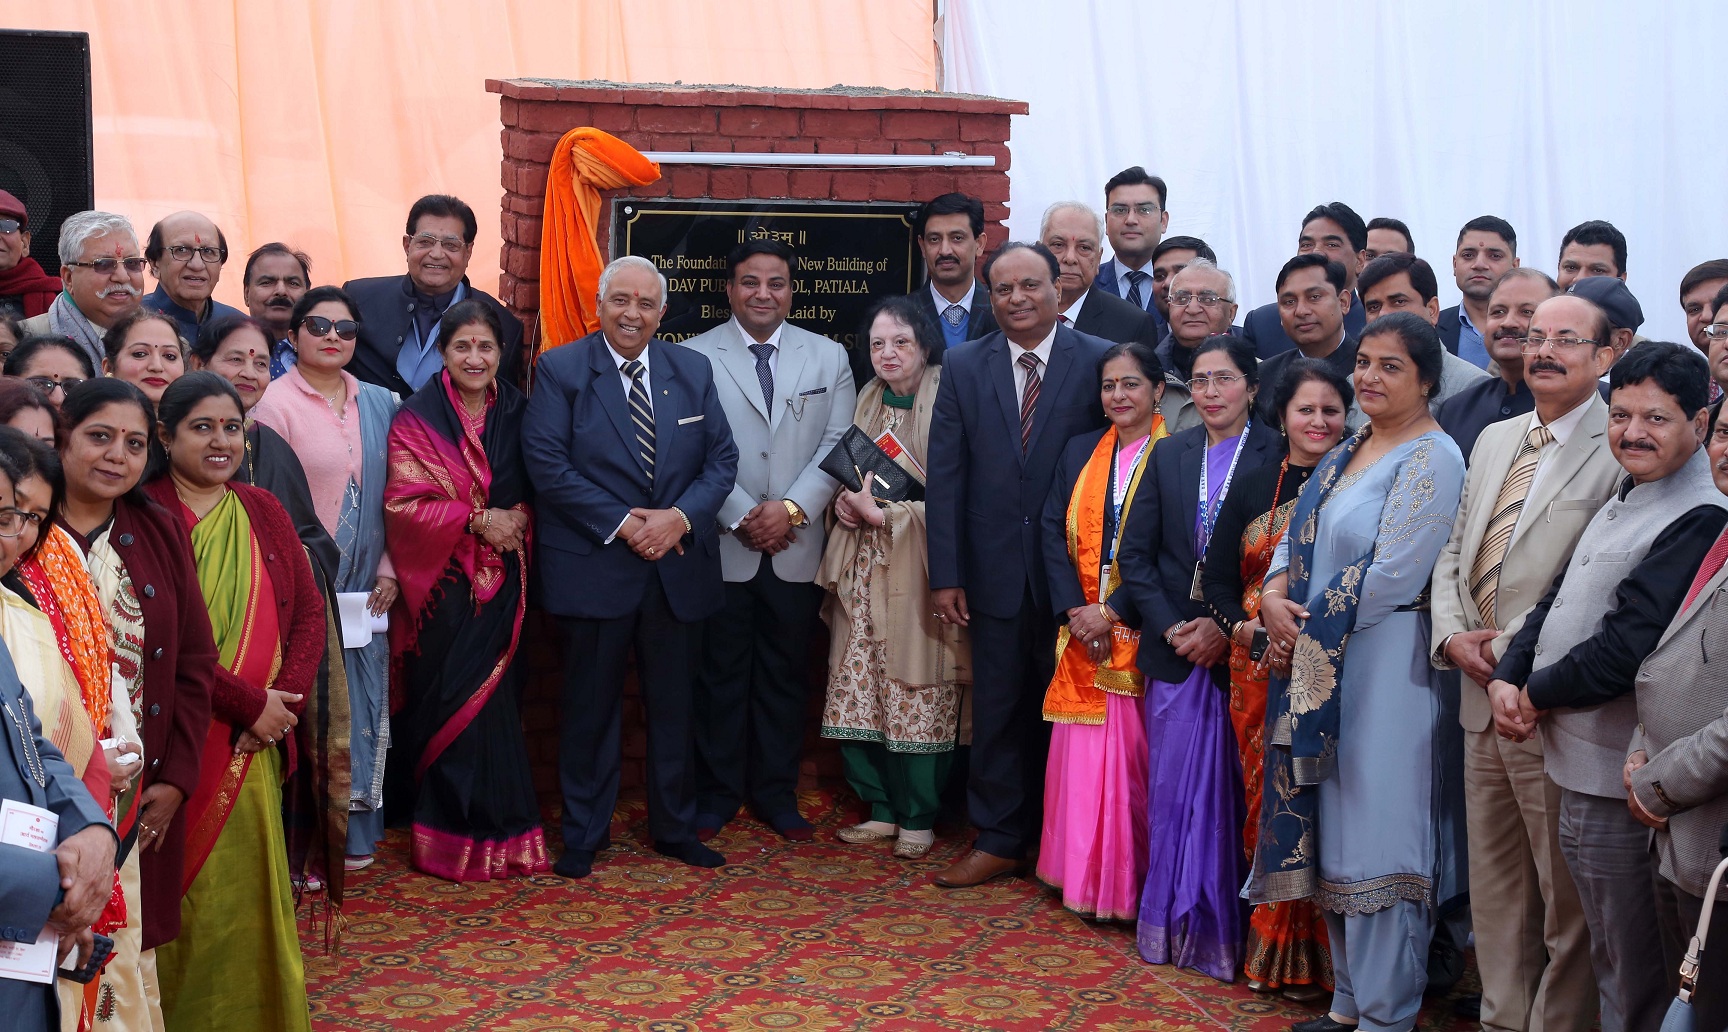 DAV Patiala lays foundation at new site with the celebration of Akankshayein